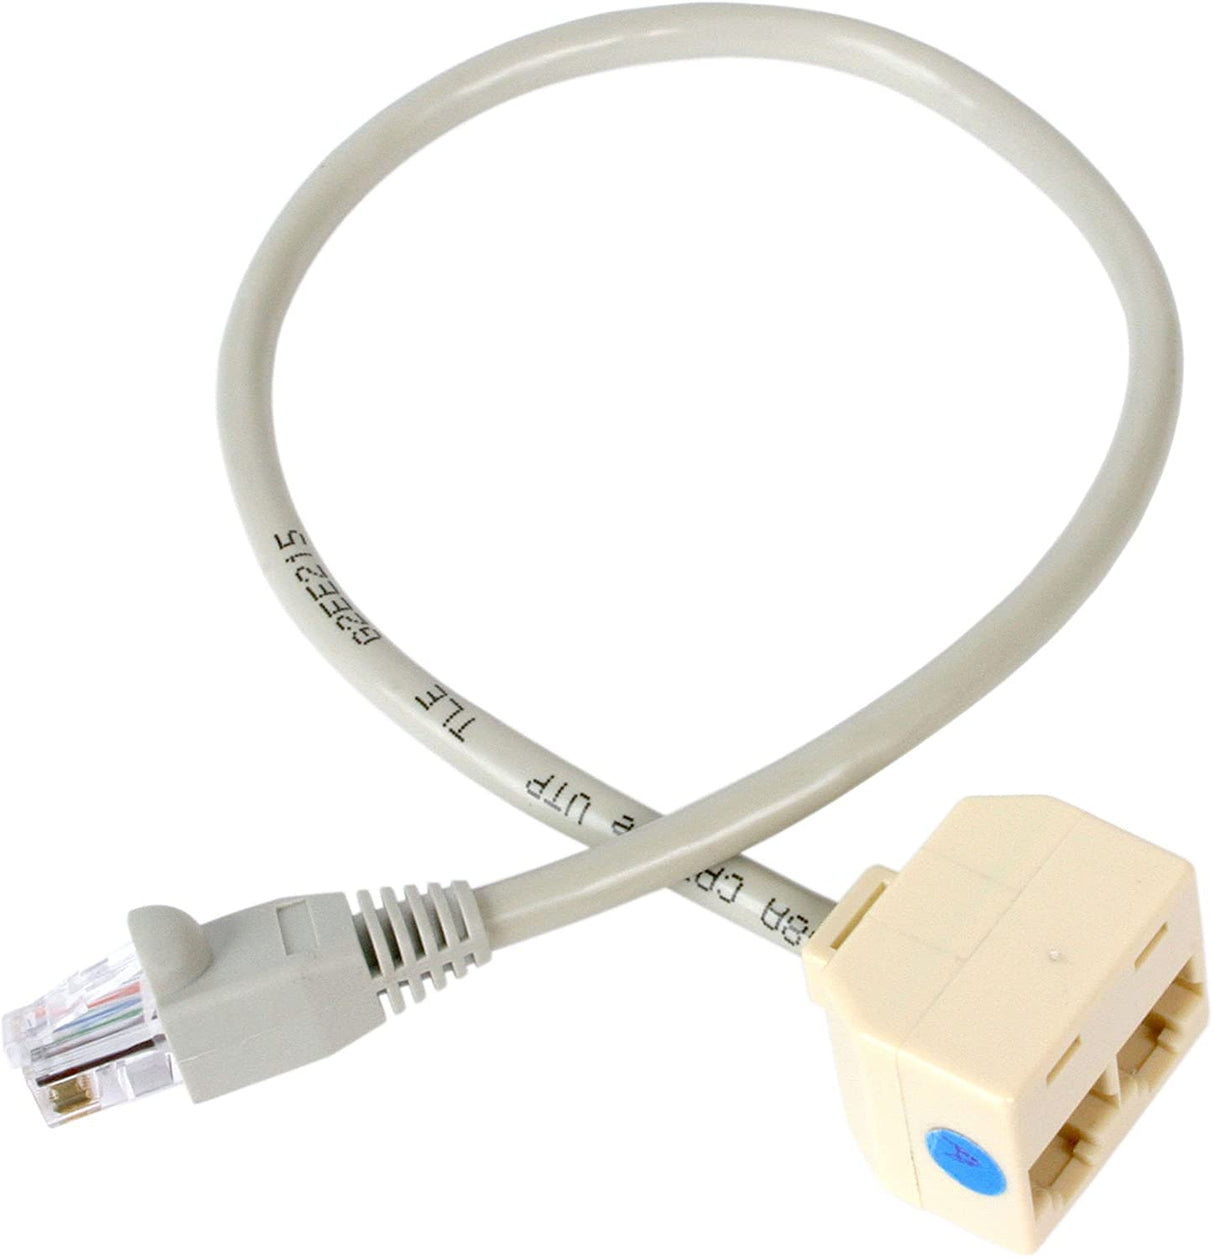 Product  StarTech.com 2-to-1 RJ45 10/100 Mbps Splitter/Combiner - One  adapter required at each end of the connection - network splitter